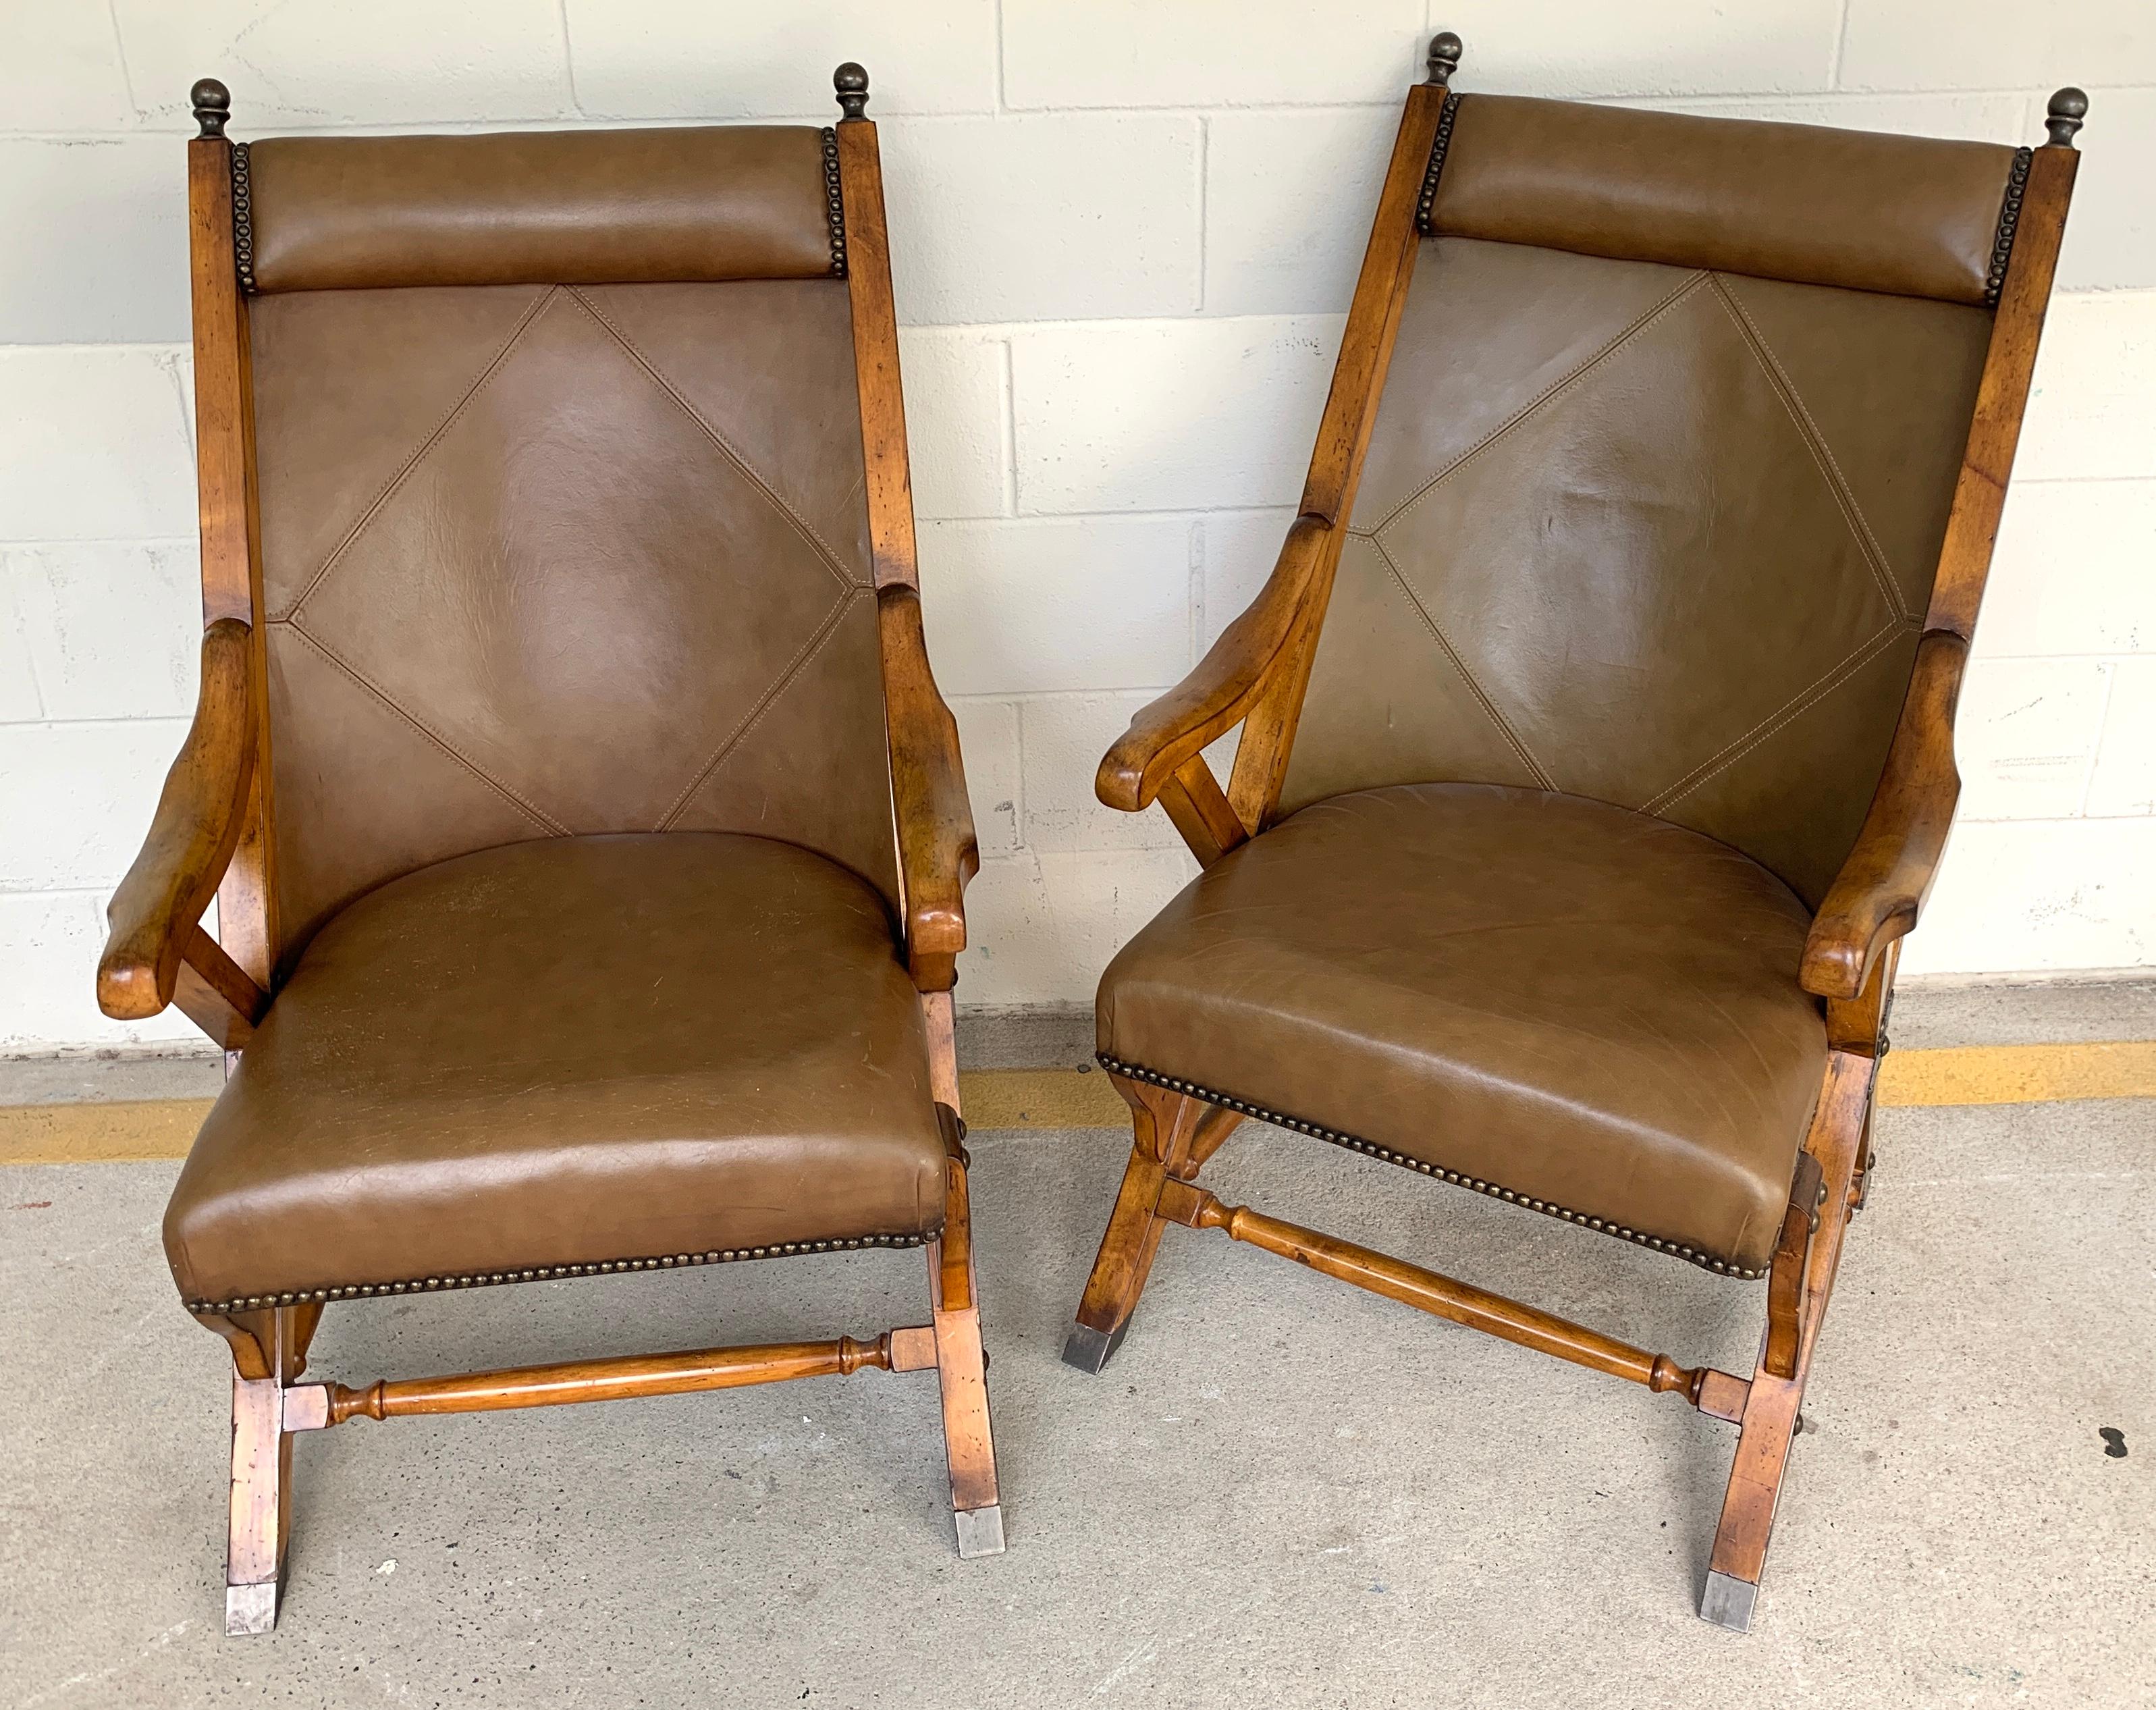 Pair of English Campaign style chair elm and leather chairs, Each one with stitched leather backrests, raised on stationary (they do not fold) brass-mounted elm frames. 24